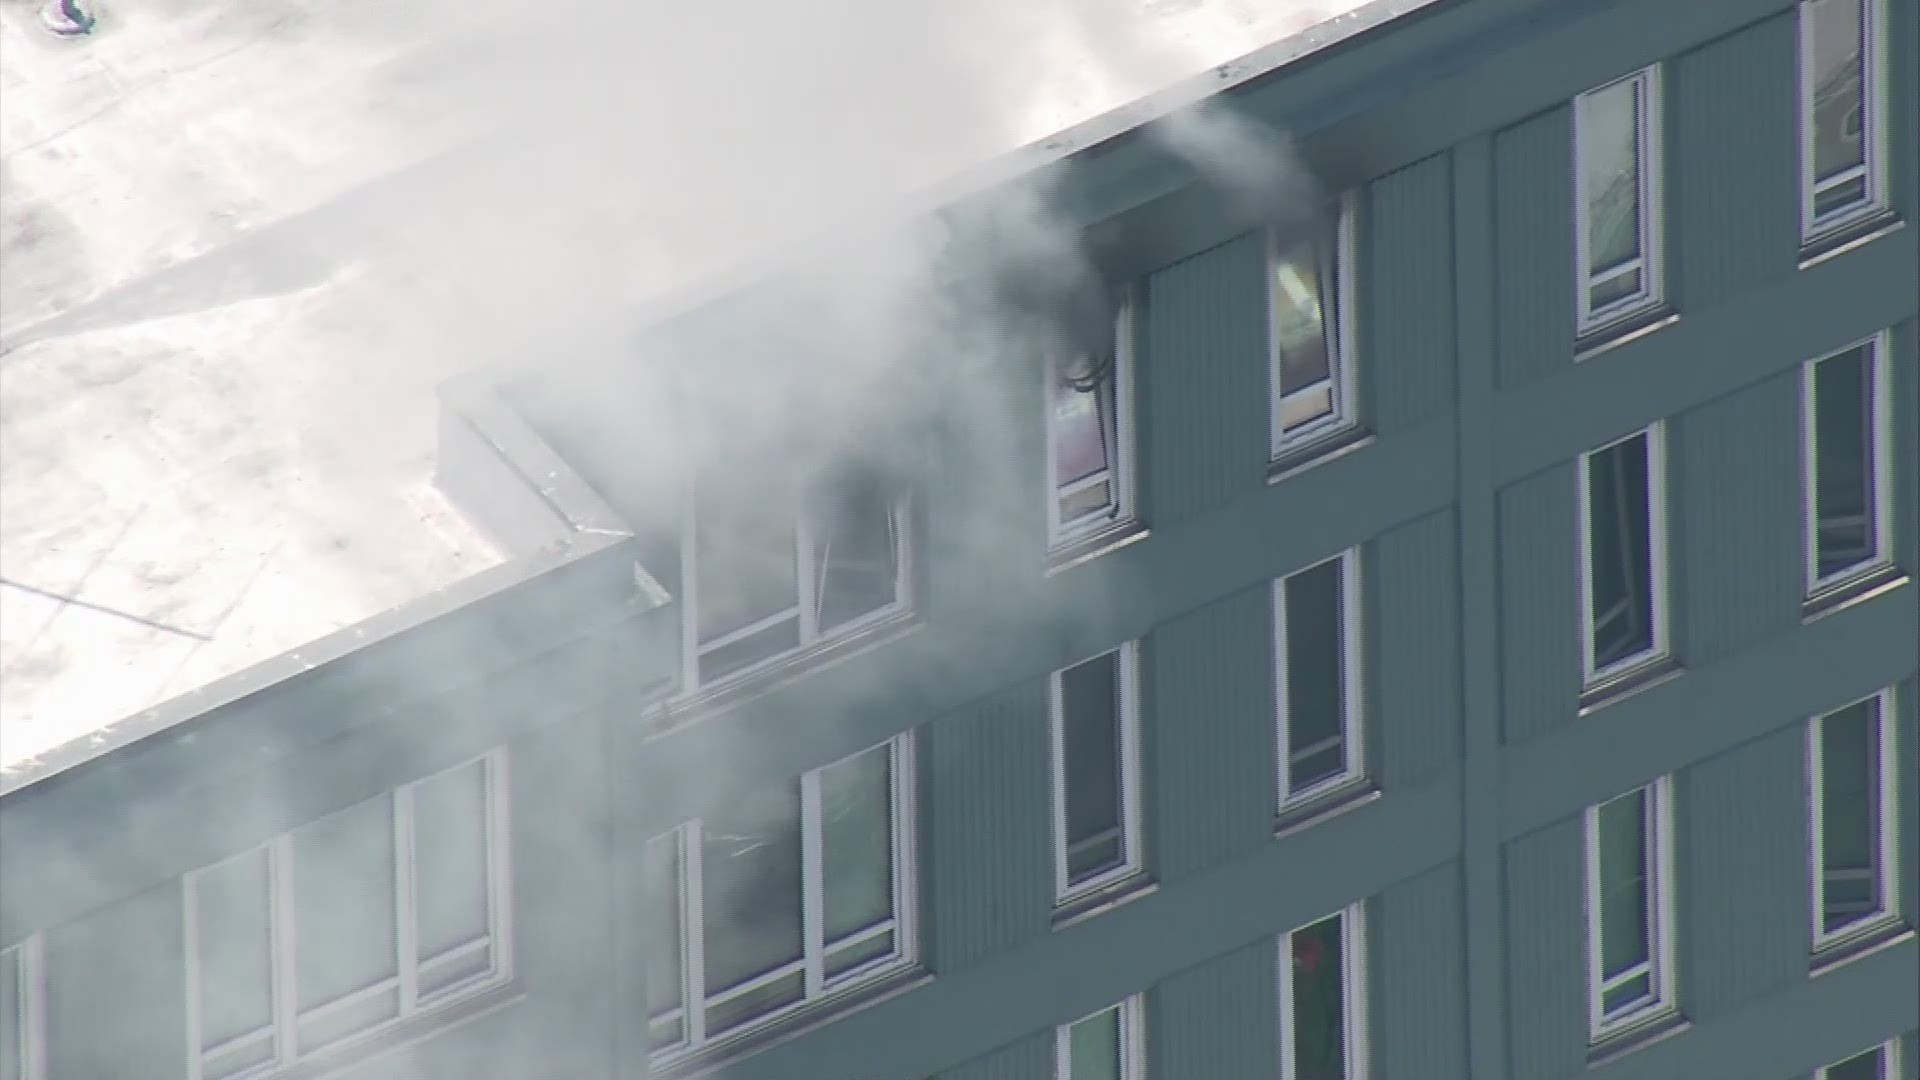 Smoke was seen billowing from the 16th floor of the Bell Tower Apartments in Seattle's Belltown neighborhood on Monday afternoon. Fire crews arrived and knocked down flames. No reports of injuries.